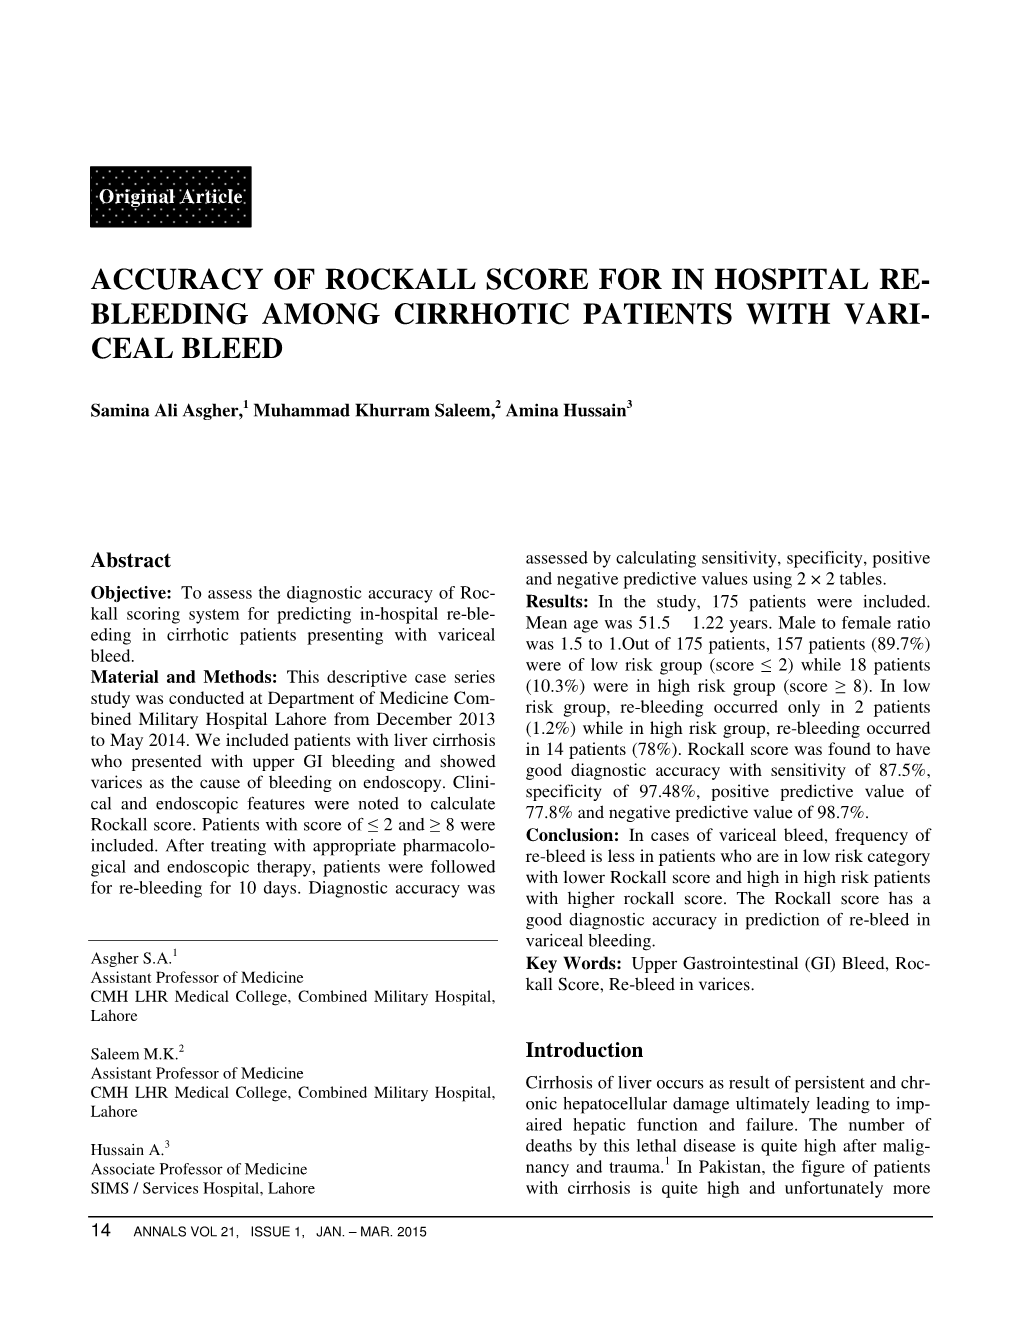 Accuracy of Rockall Score for in Hospital Re- Bleeding Among Cirrhotic Patients with Vari- Ceal Bleed